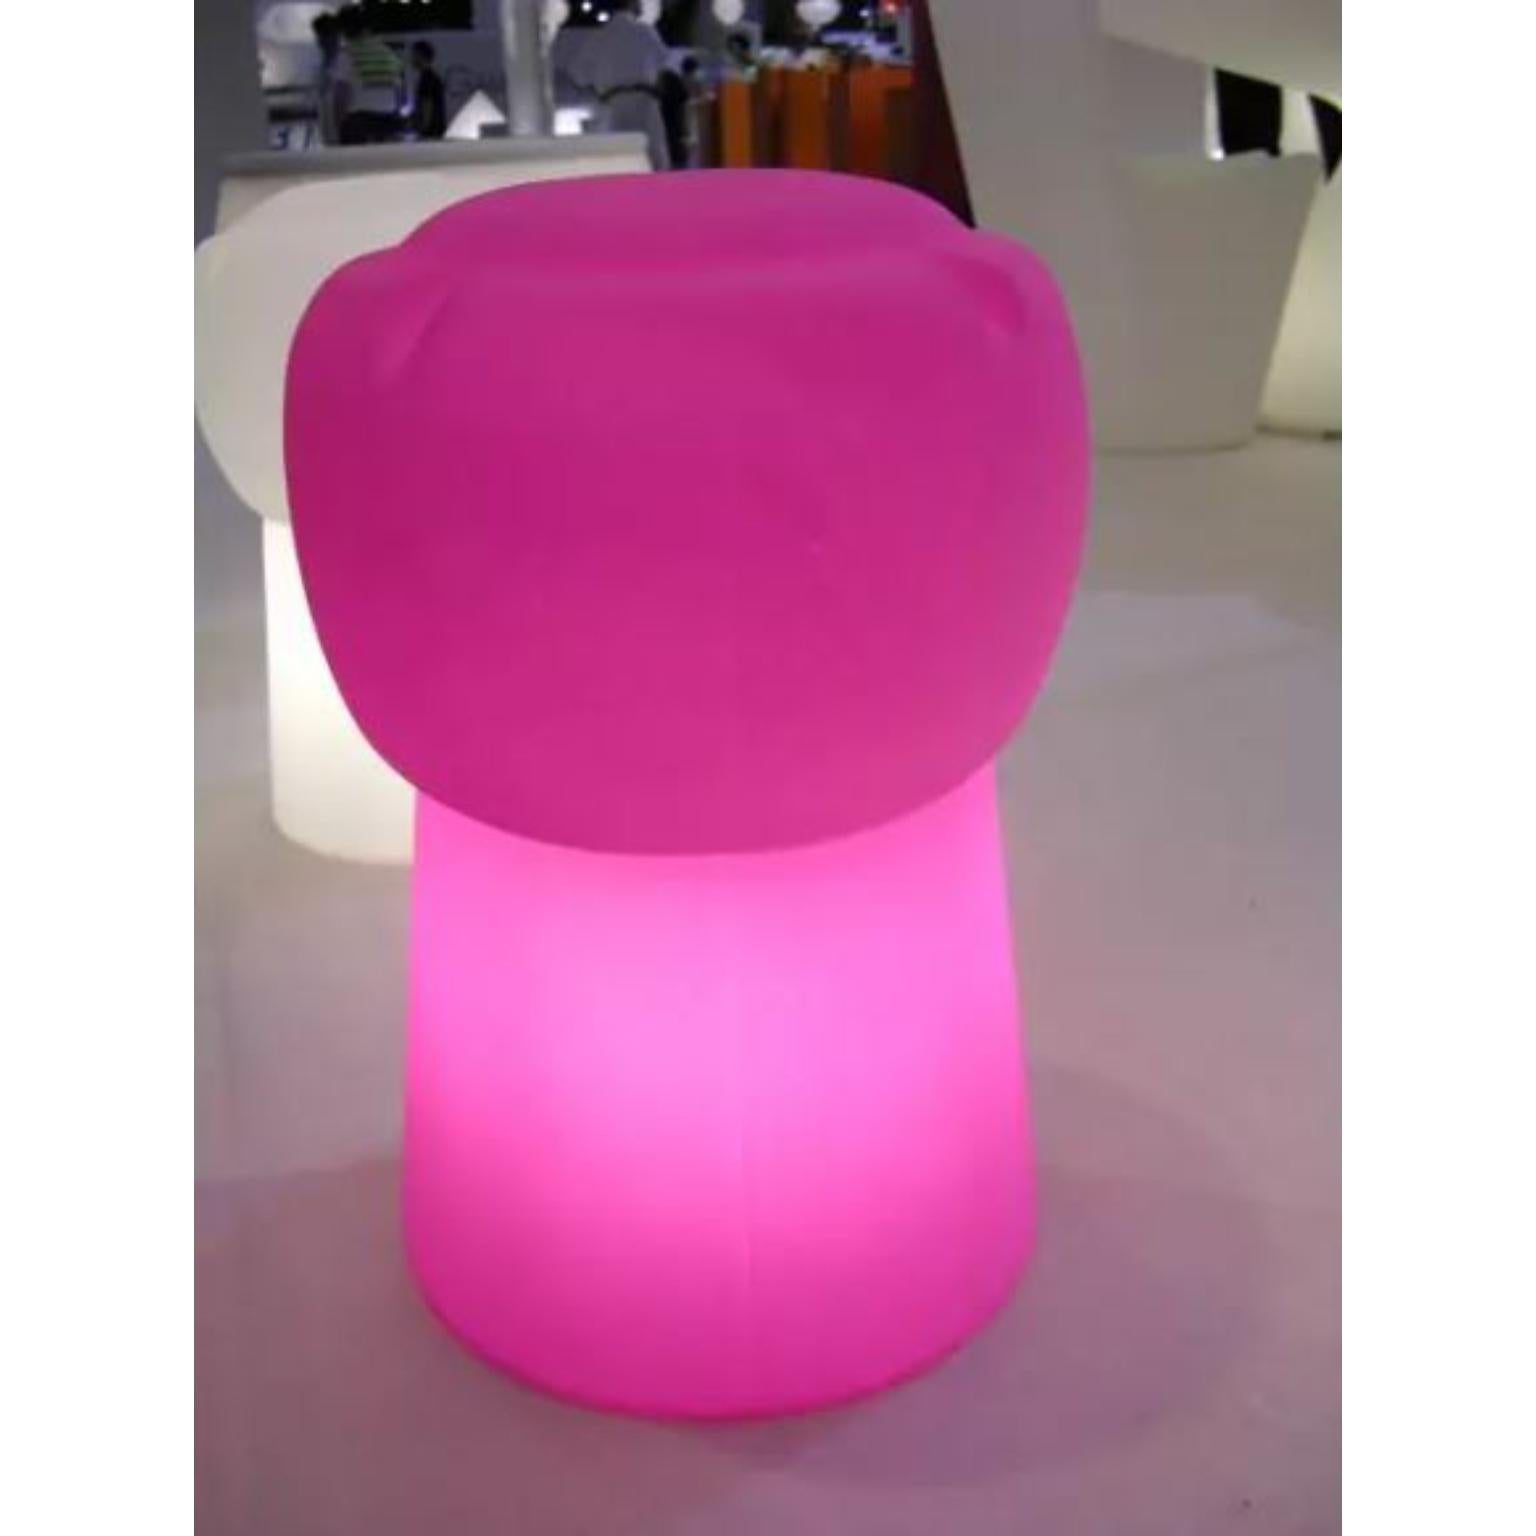 Milky White Cin Cin Stool by SLIDE Studio
Dimensions: Ø 32 x H 49 cm. Seat Height: 49 cm.
Materials: Polyethylene.
Weight: 2 kg.

Available in different color options. This product is suitable for indoor and outdoor use. Please contact us. 

Our